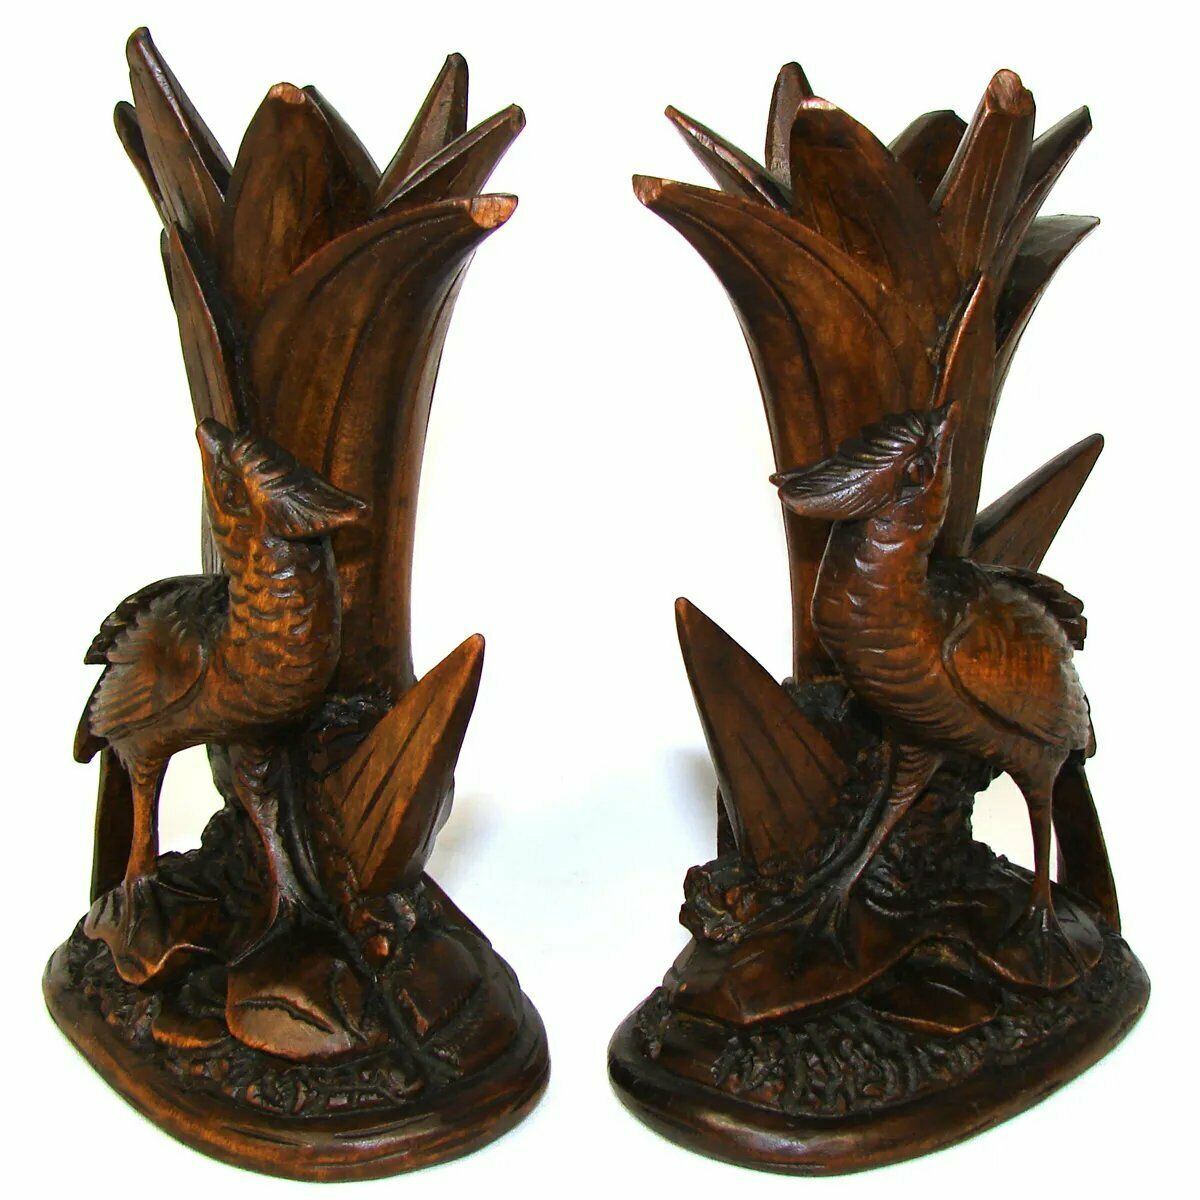 Antique Black Forest Carved Epergne Vase or Candle Stand Pair, Game Bird Figures